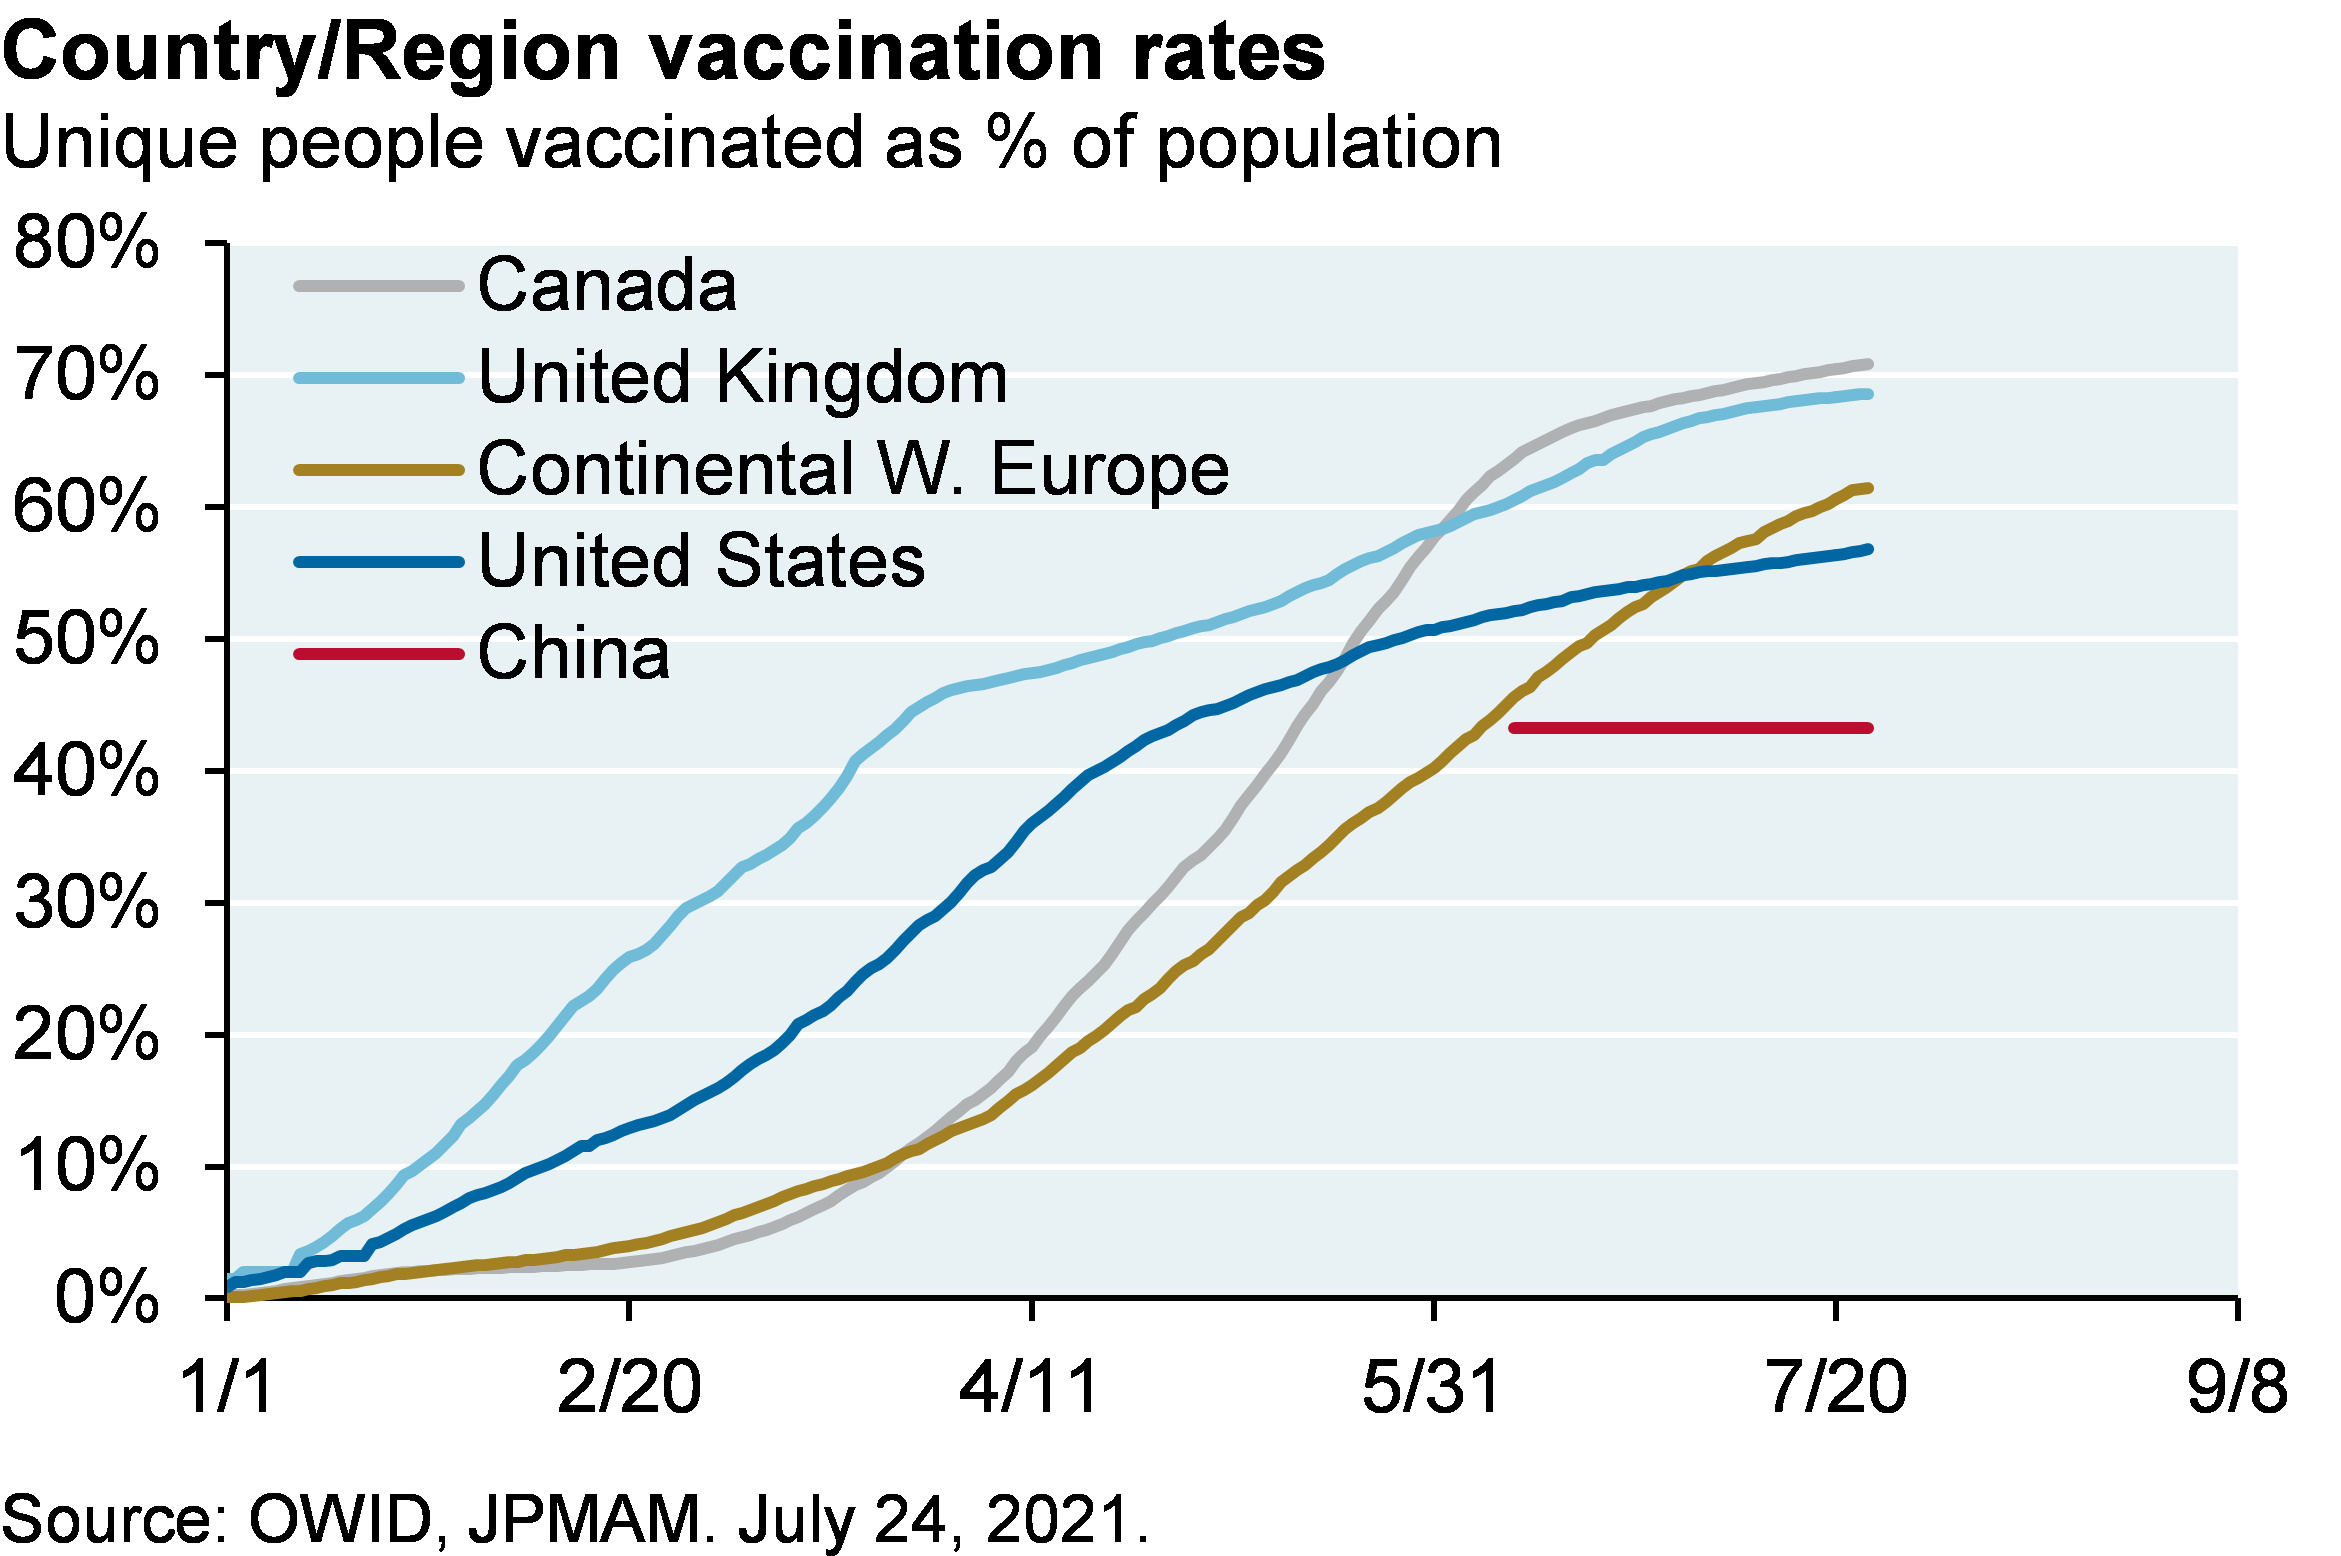 Line chart shows country/region vaccination rates for Canada, United Kingdom, Continental Western Europe, United States and China since January 2021, shown as unique people vaccinated as % of population. At their most recent point, Canada has the highest percentage of people vaccinated at around 70%, closely followed by the United Kingdom. Continental Western Europe’s vaccination rate is just over 60% followed by the United States at 57%. China’s vaccination rate is just above 40%. 